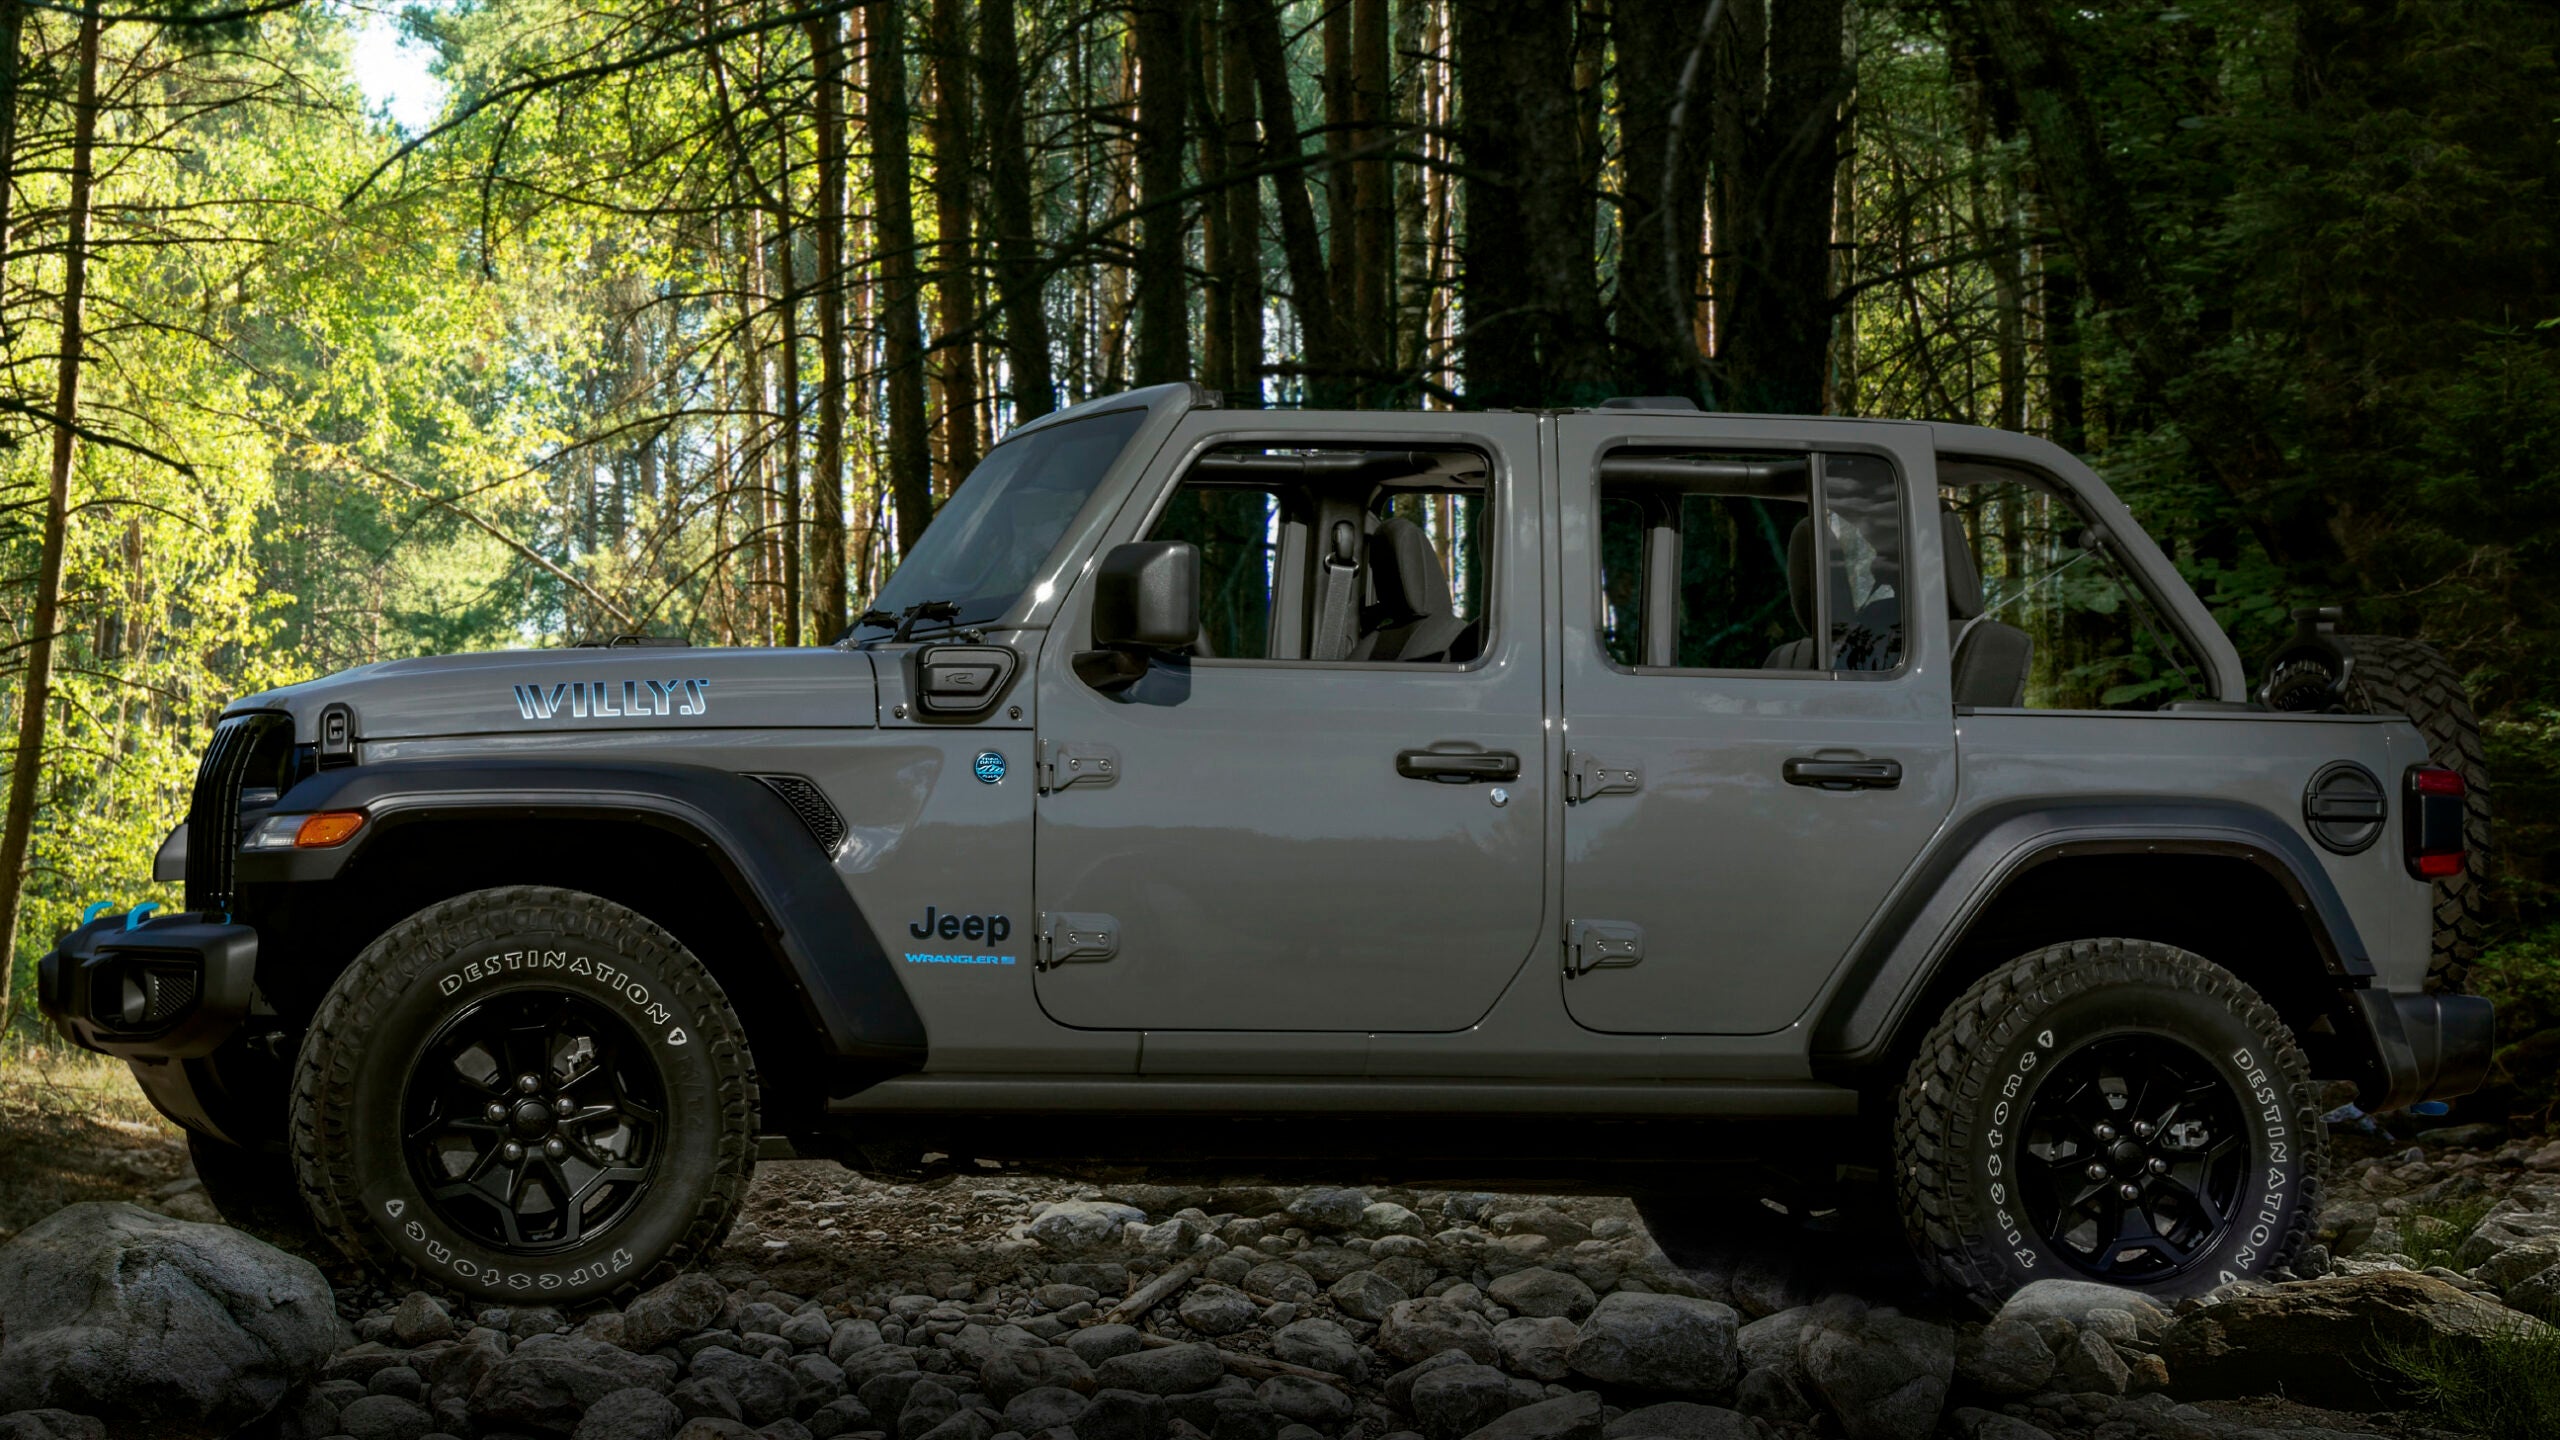 The Jeep Wrangler 4xe Was America’s Best-Selling Plug-In Hybrid in 2022